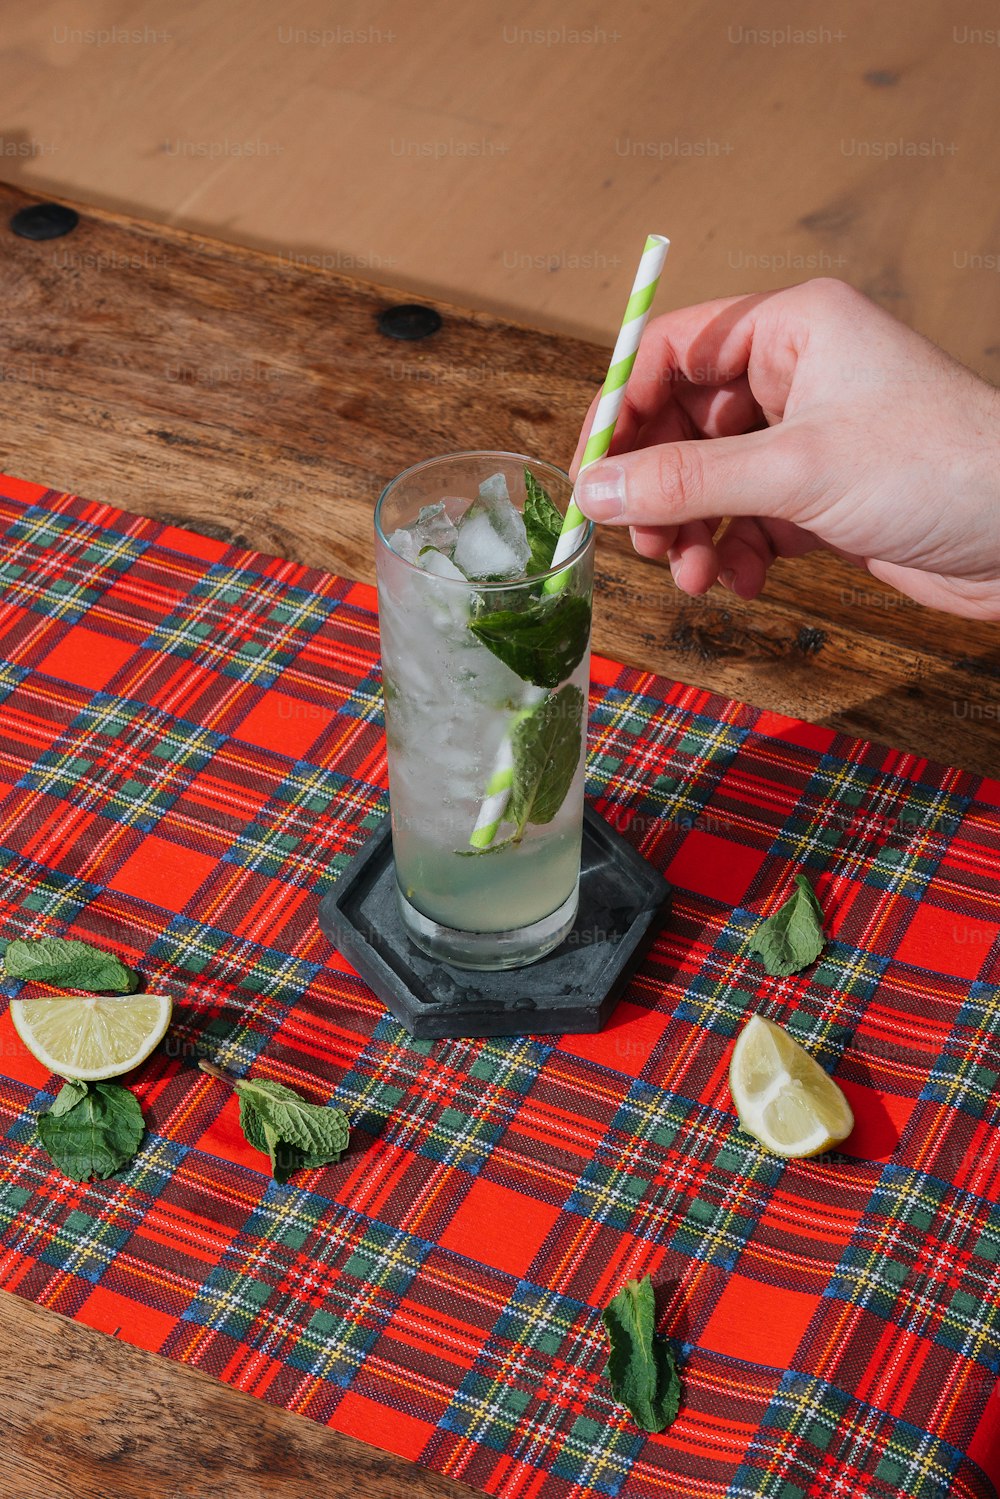 a person holding a green and white straw in a glass